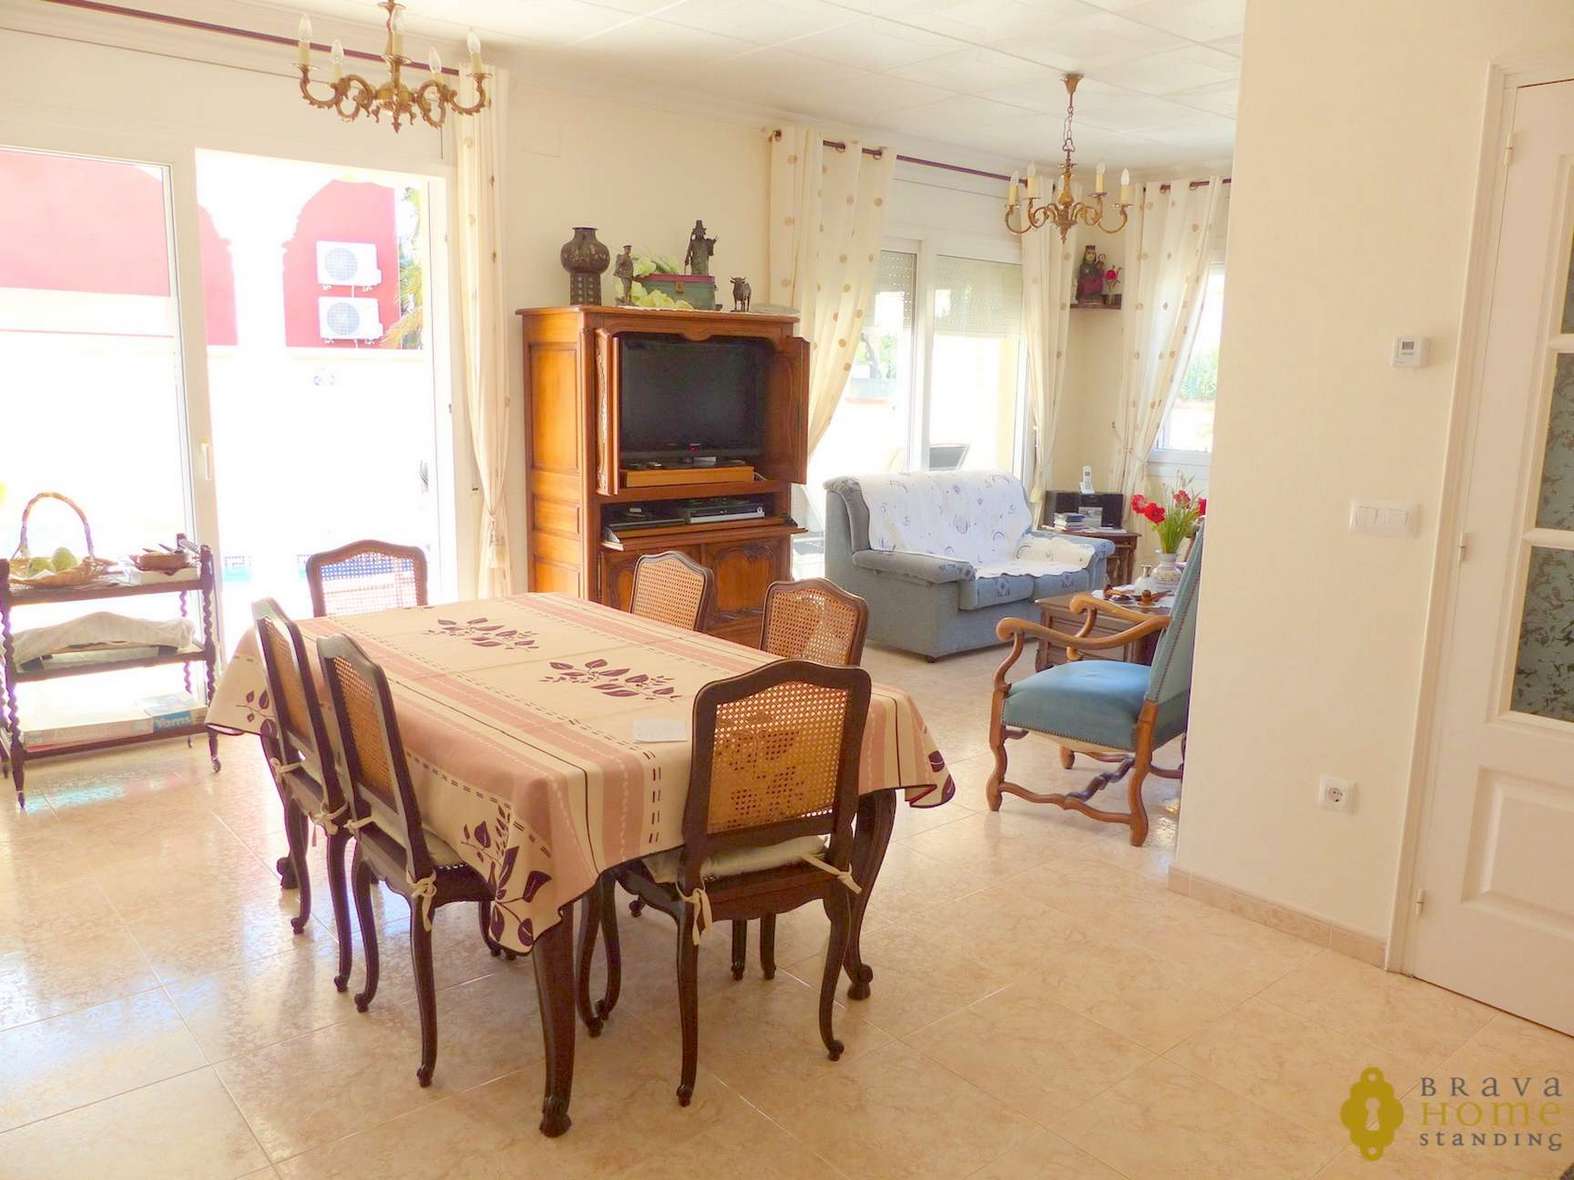 Beautiful house with pool for sale in Empuriabrava